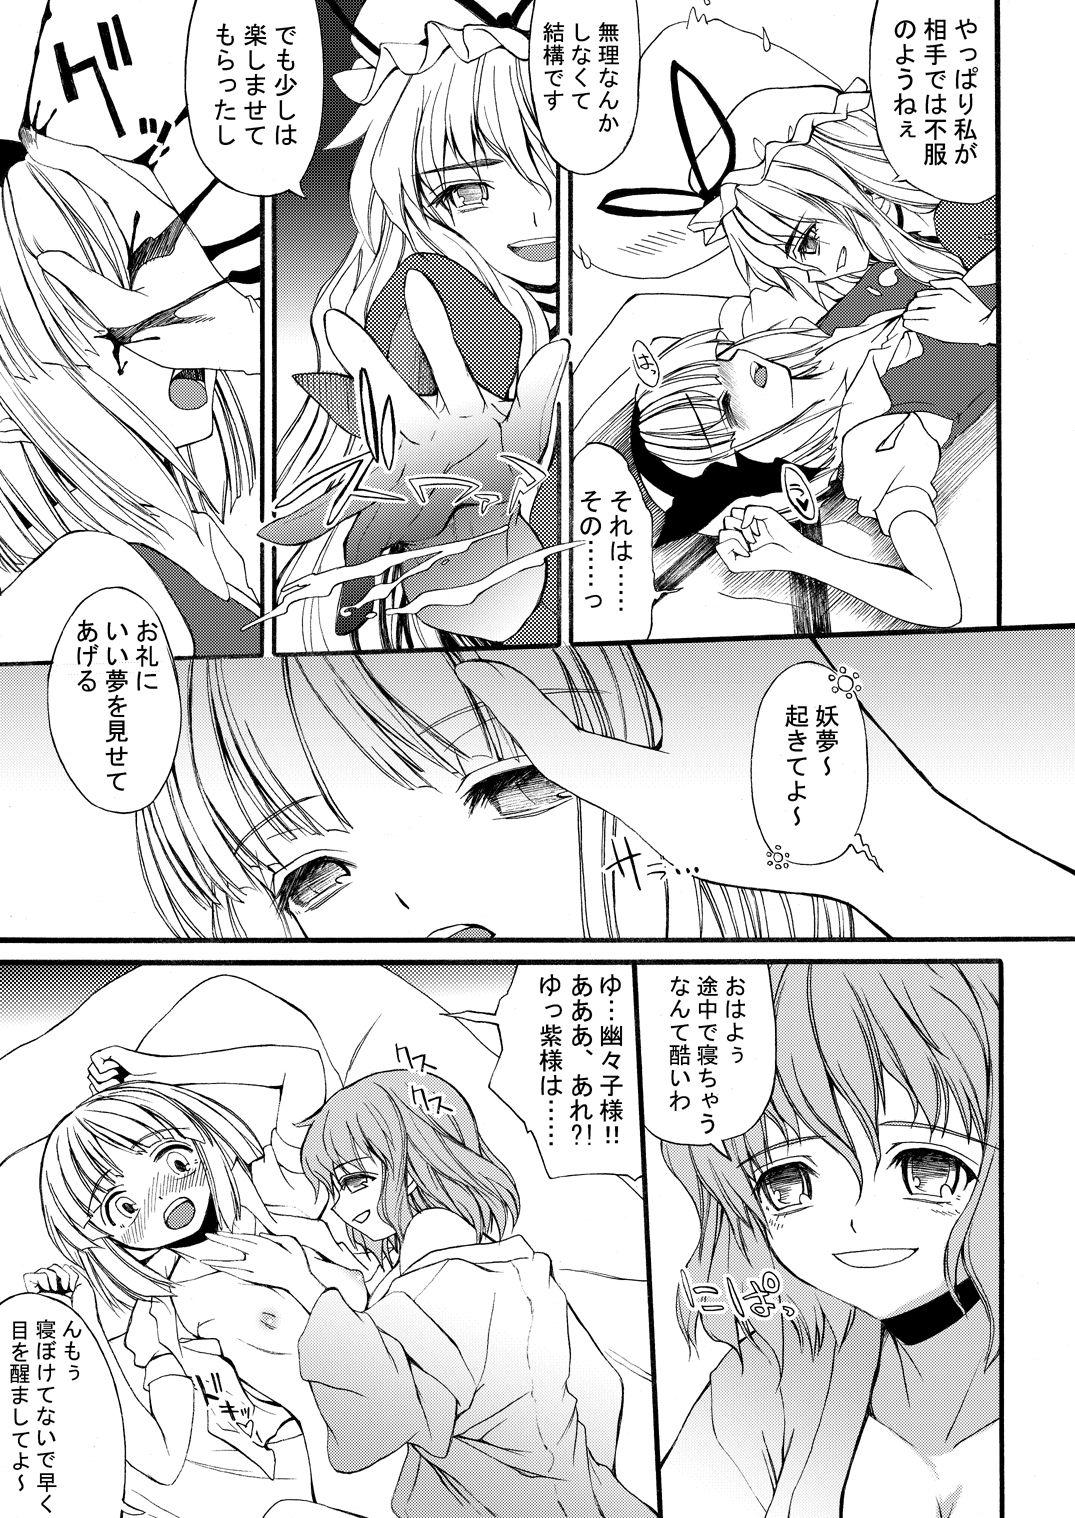 Sola 白玉サクラガサネ/サナギ - Touhou project Real Amatuer Porn - Page 10